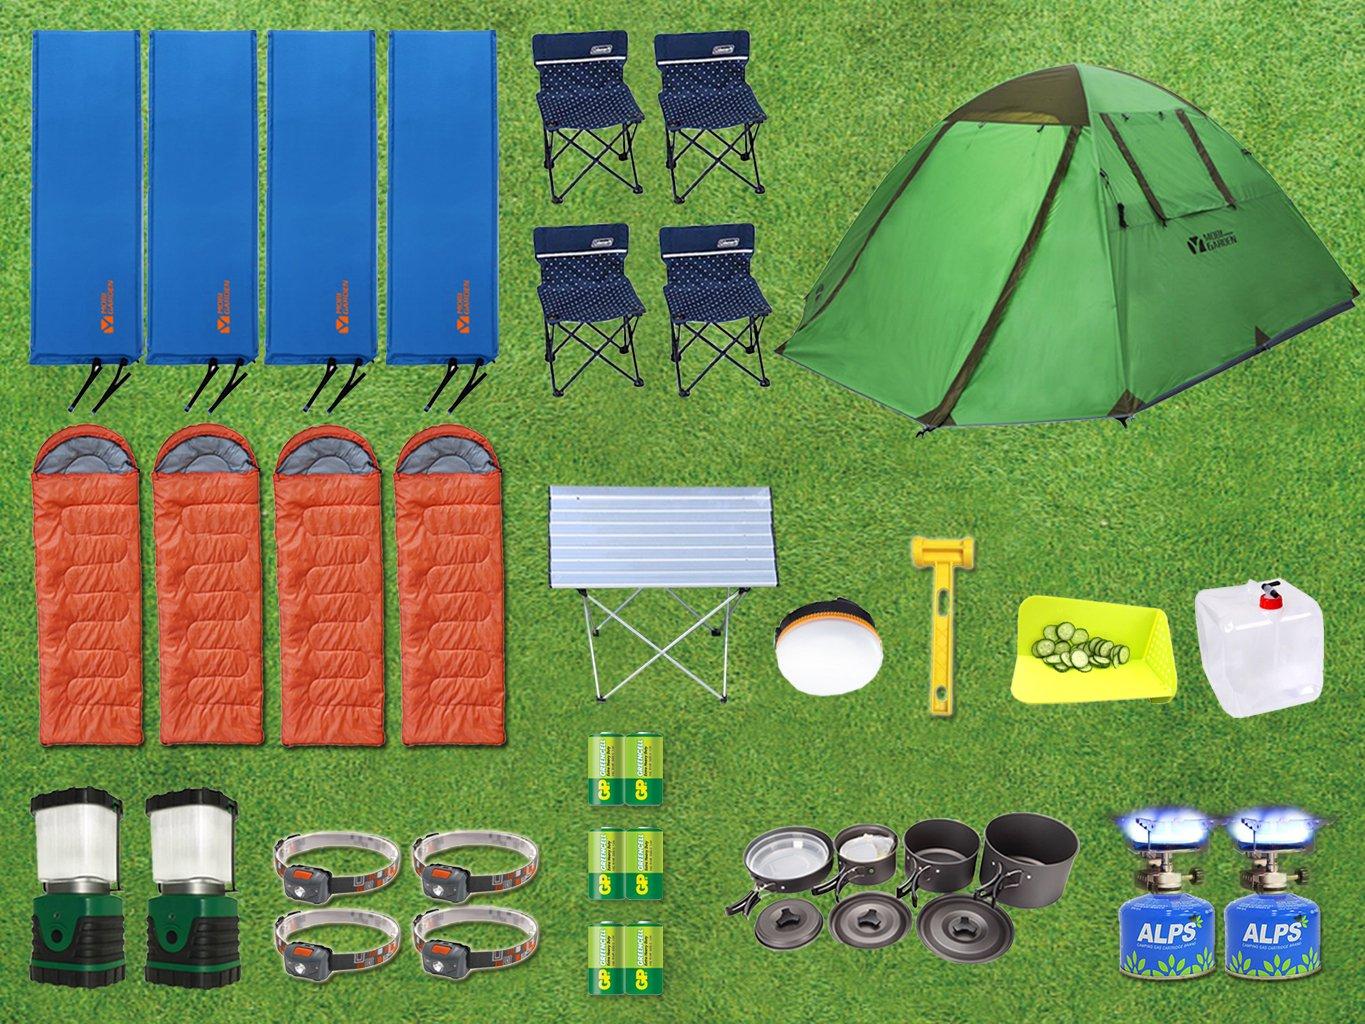 GOGO CAMP COMPANY 【Direct delivery to designated campsites】Camping Gear Rental Set for 2-4 pax 5